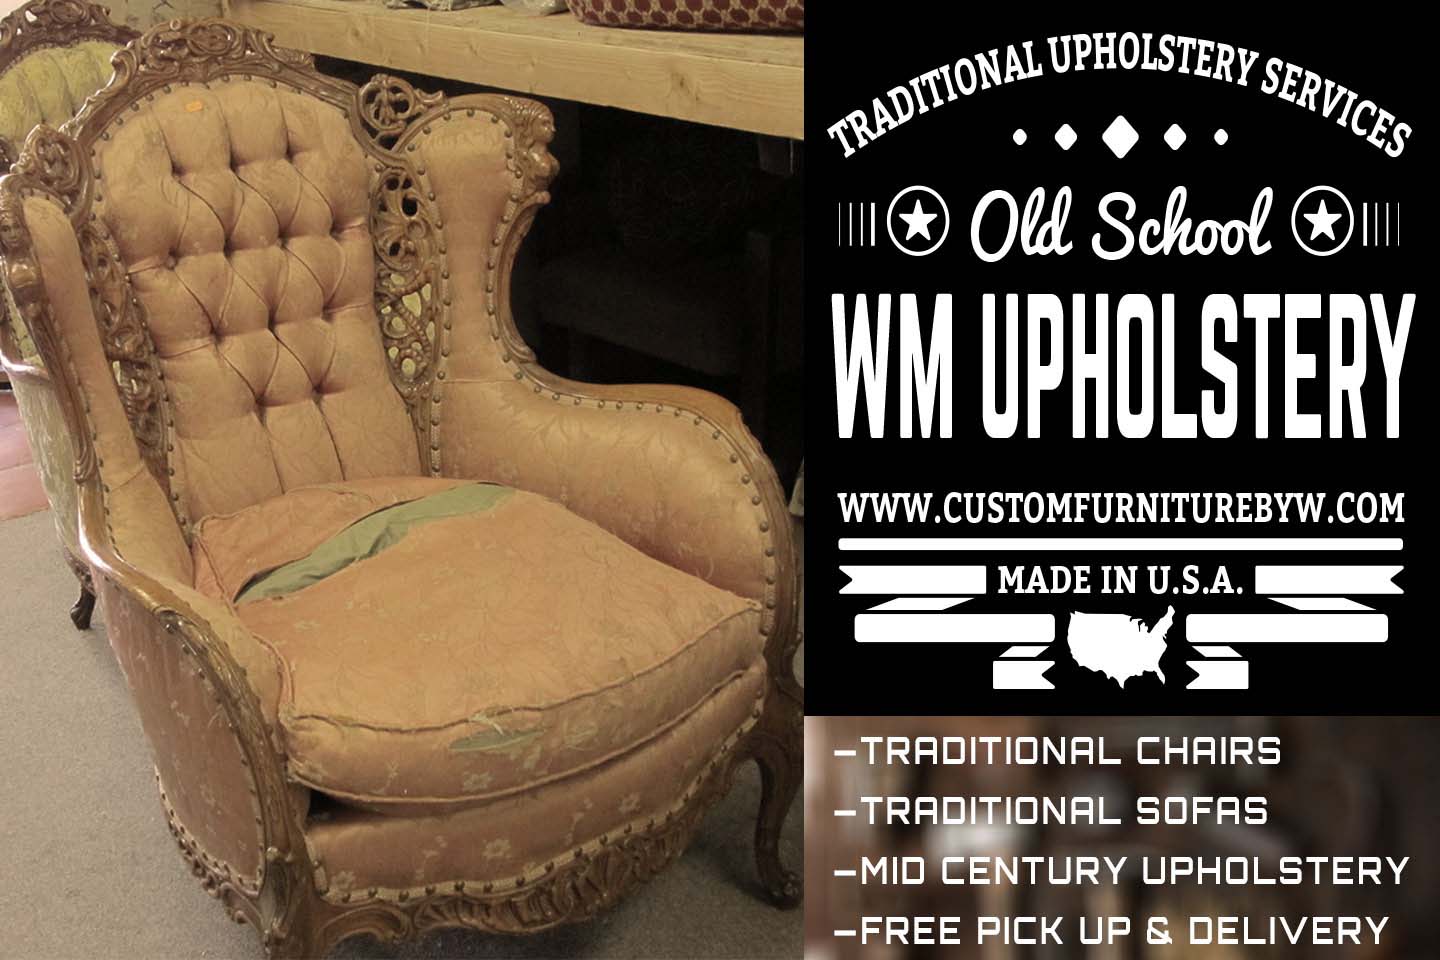 Mid Century sofa and chair upholstery and reupholstery in Van Nuys California